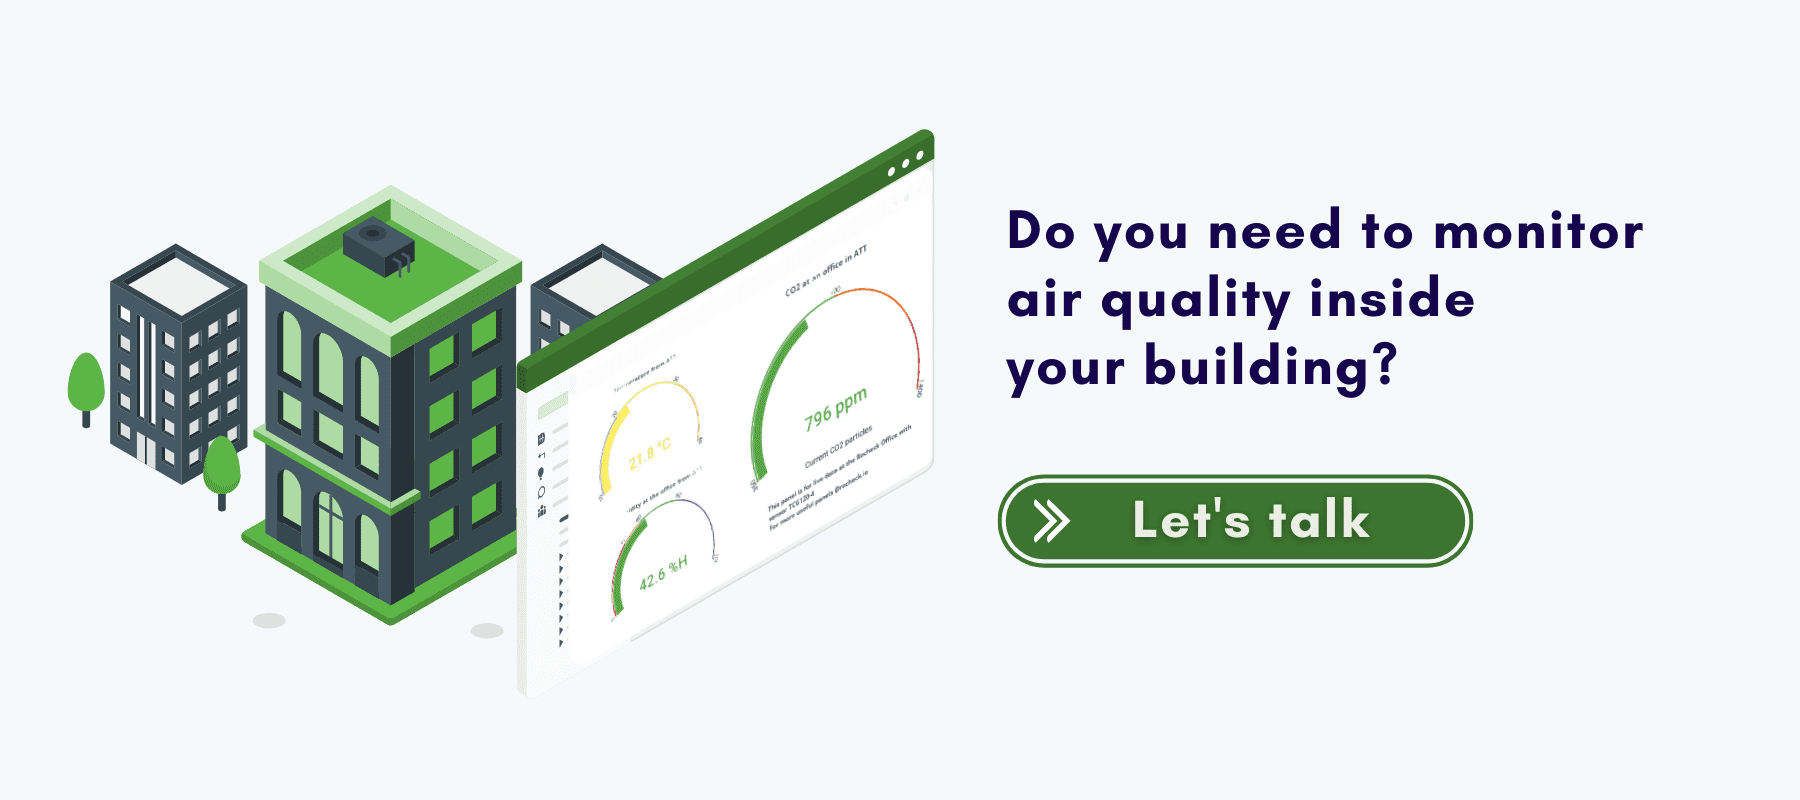 Do you need to monitor air quality inside your building? Let's talk!